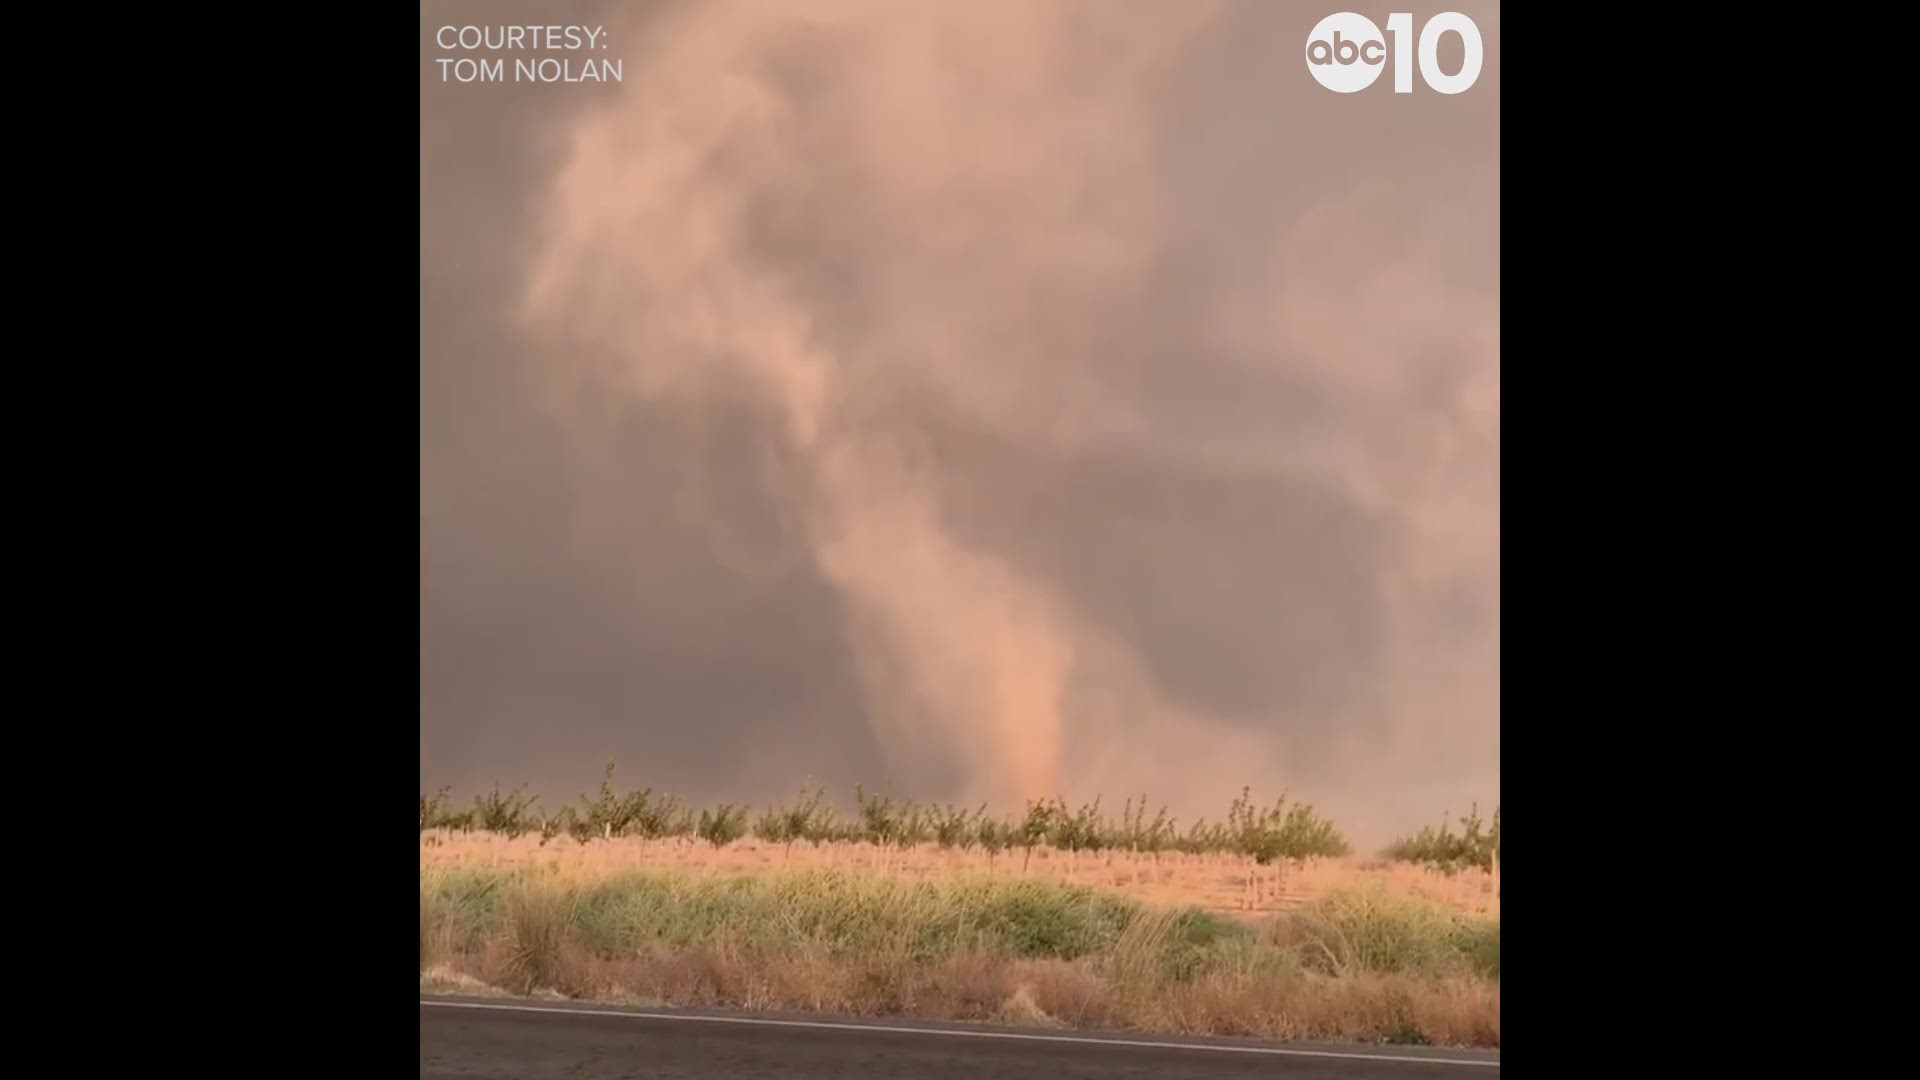 A tornado hit Davis between east Highway 101 and Highway 29 Saturday evening. The National Weather Service said they can’t confirm many details or strength yet.